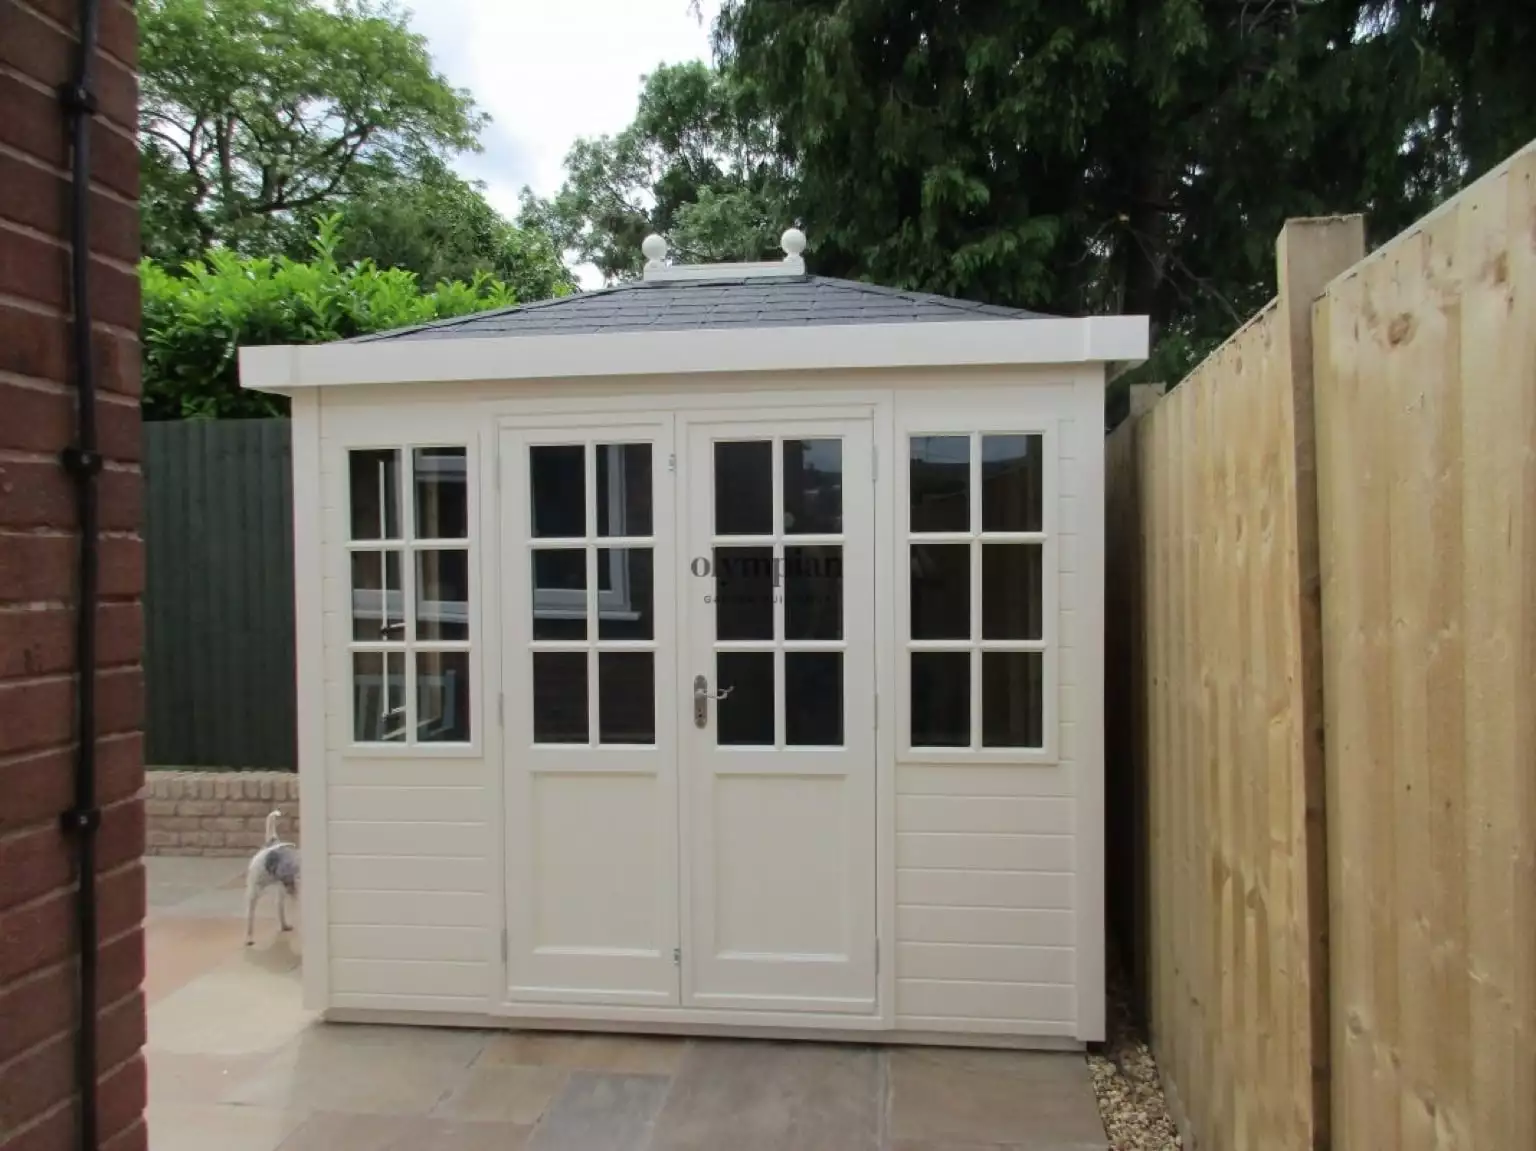 Painted hipped roof summerhouse with felt shingles